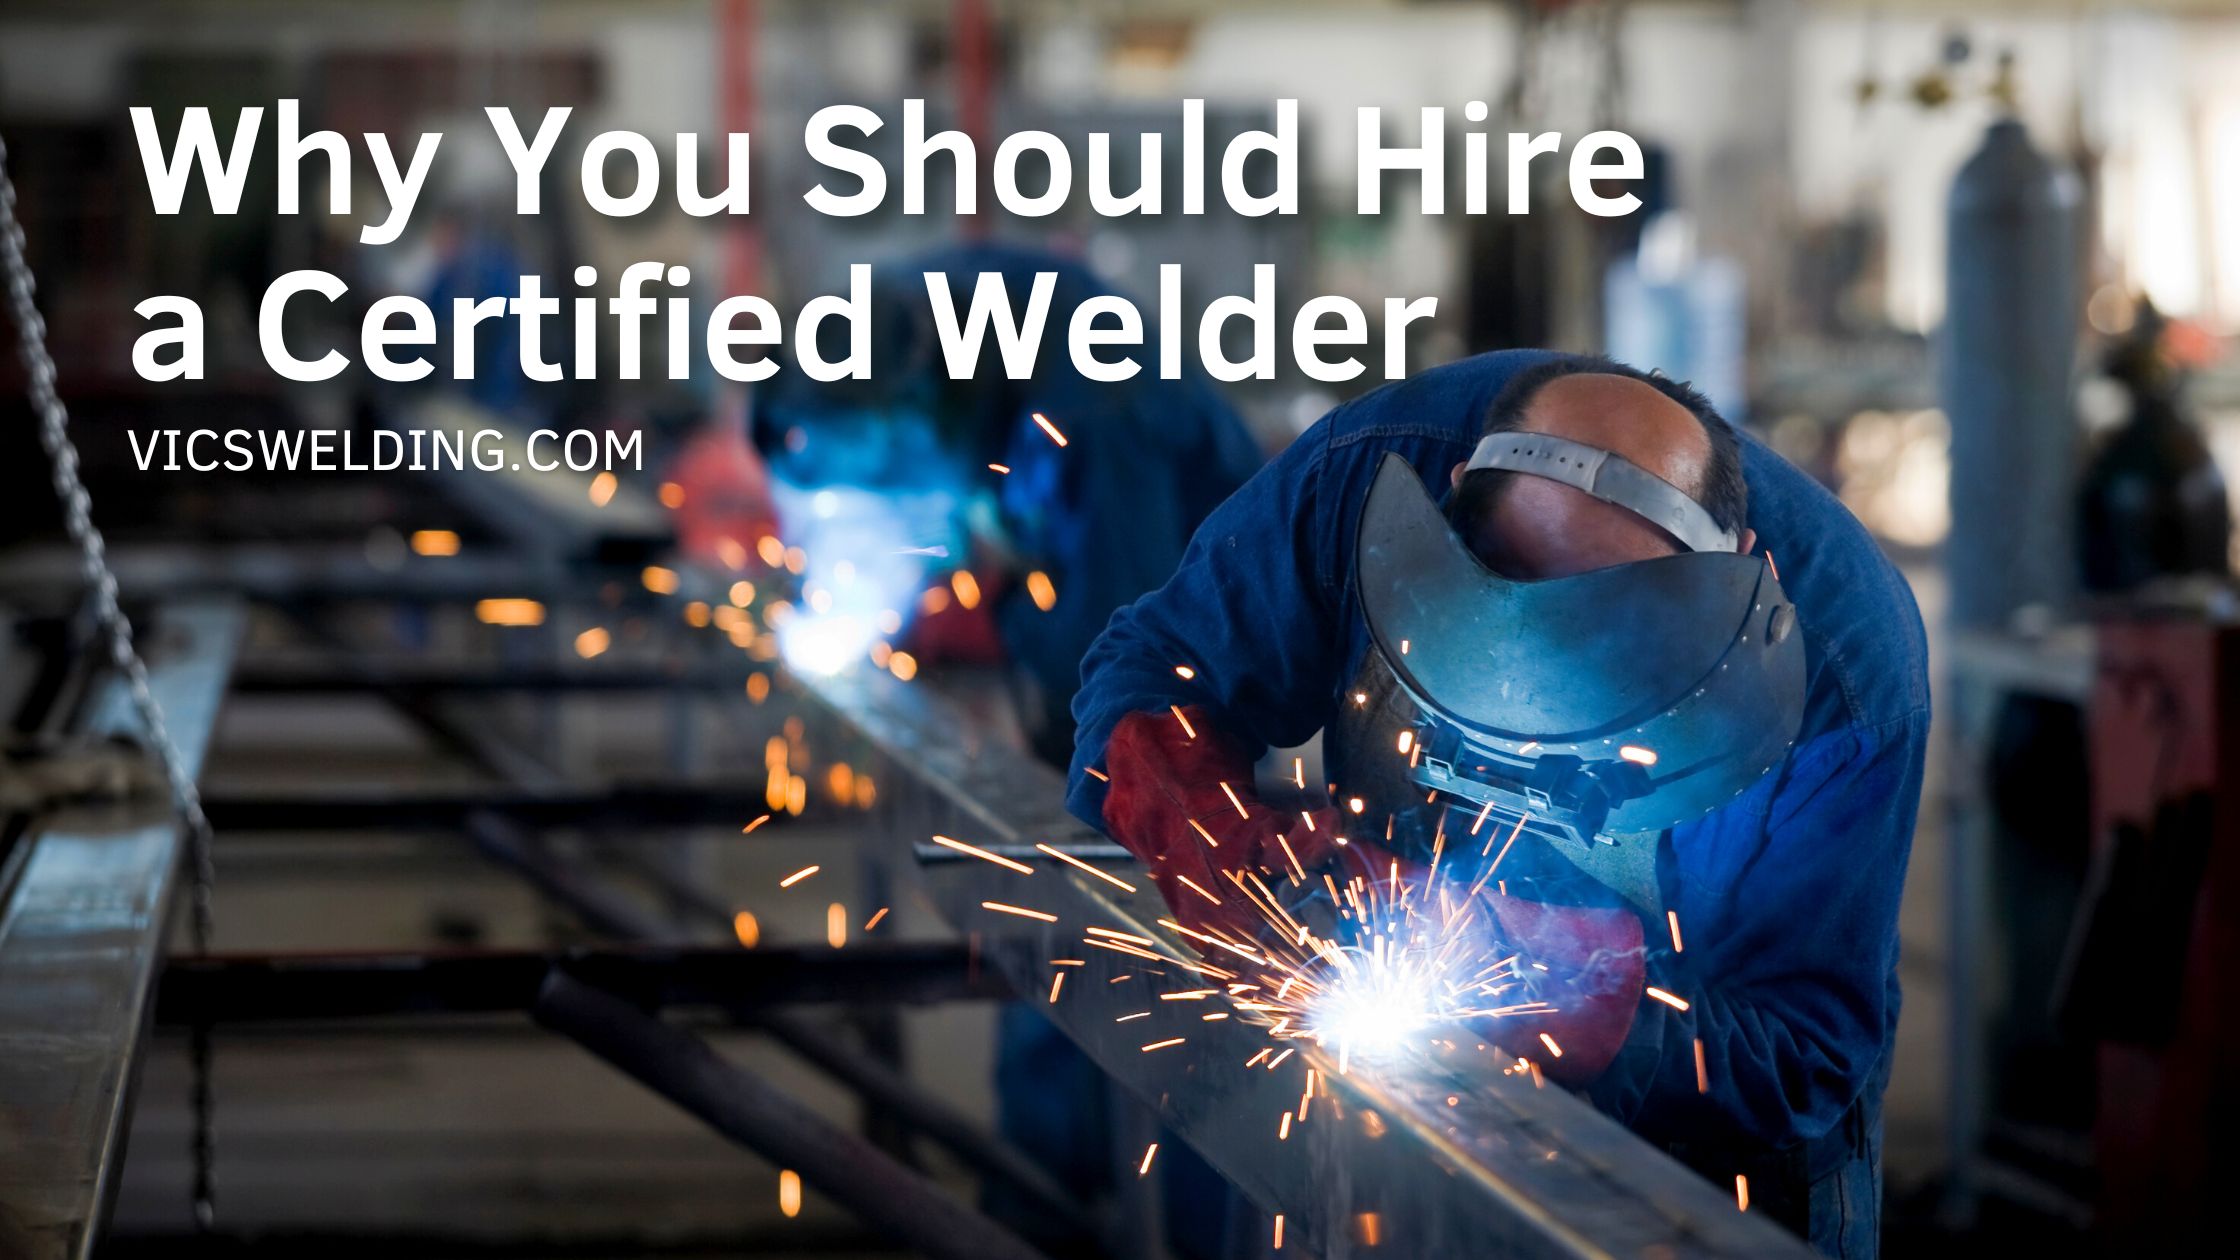 Why You Should Hire a Certified Welder